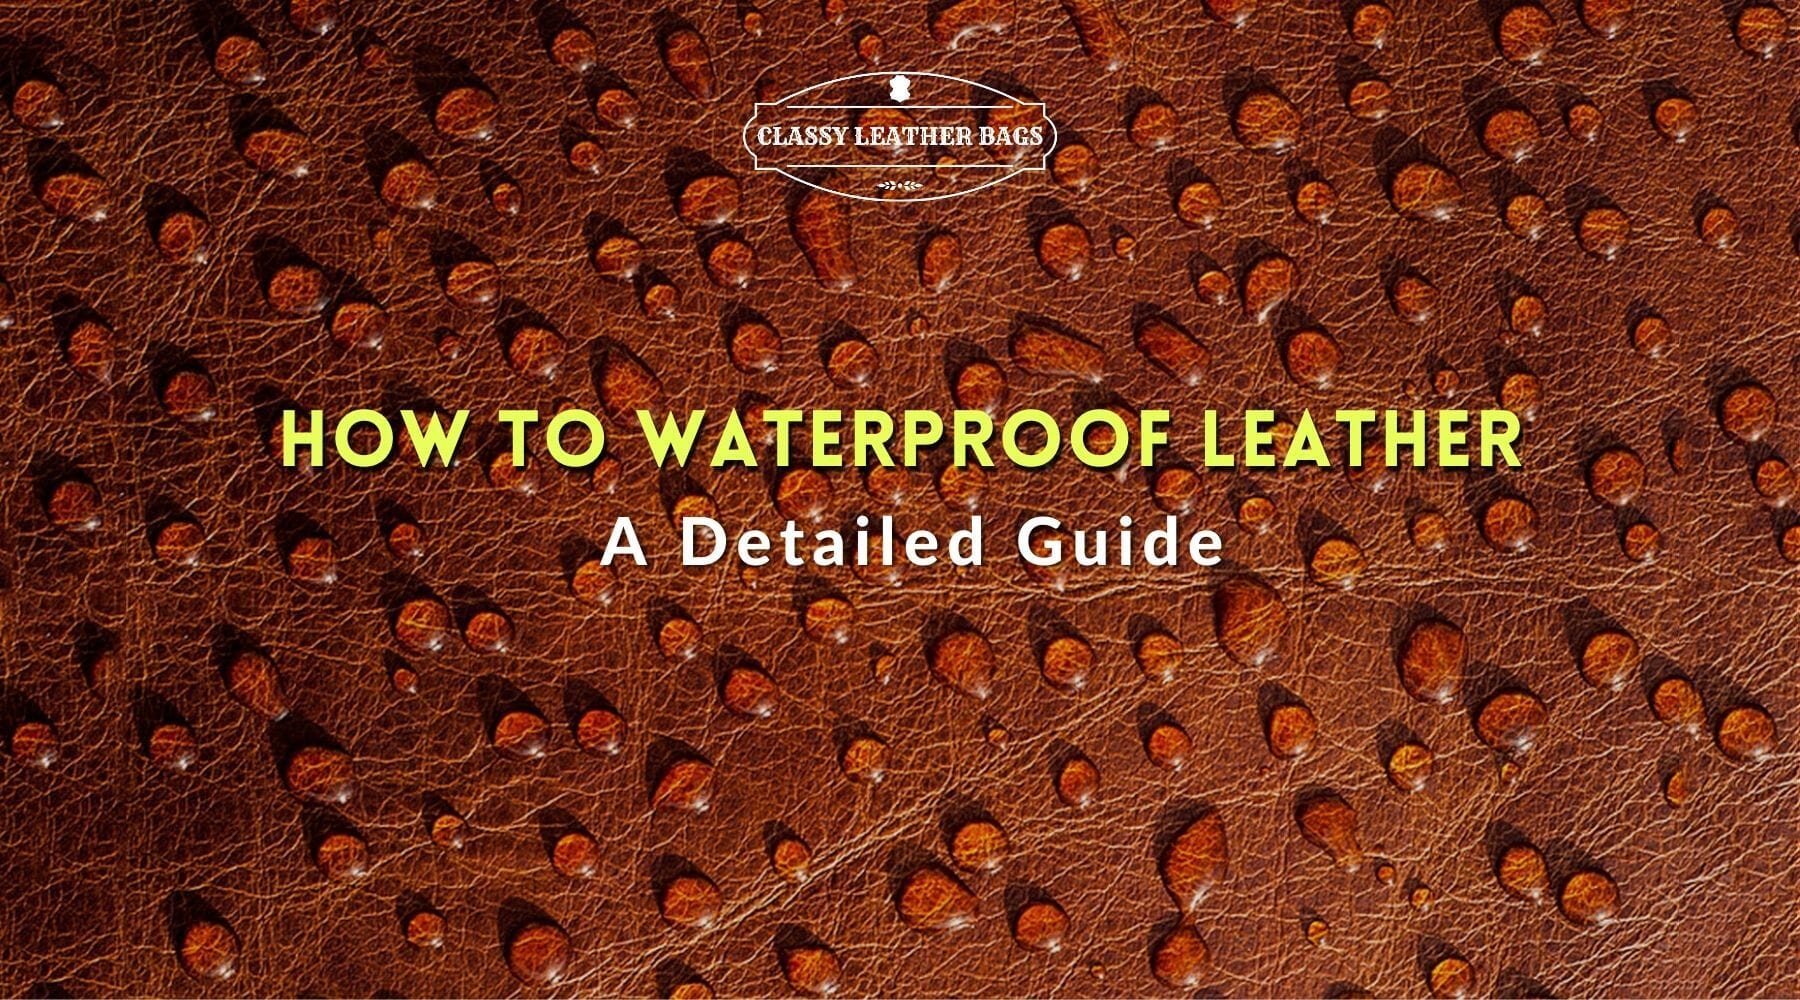 Is Leather Waterproof? How to Waterproof Leather?